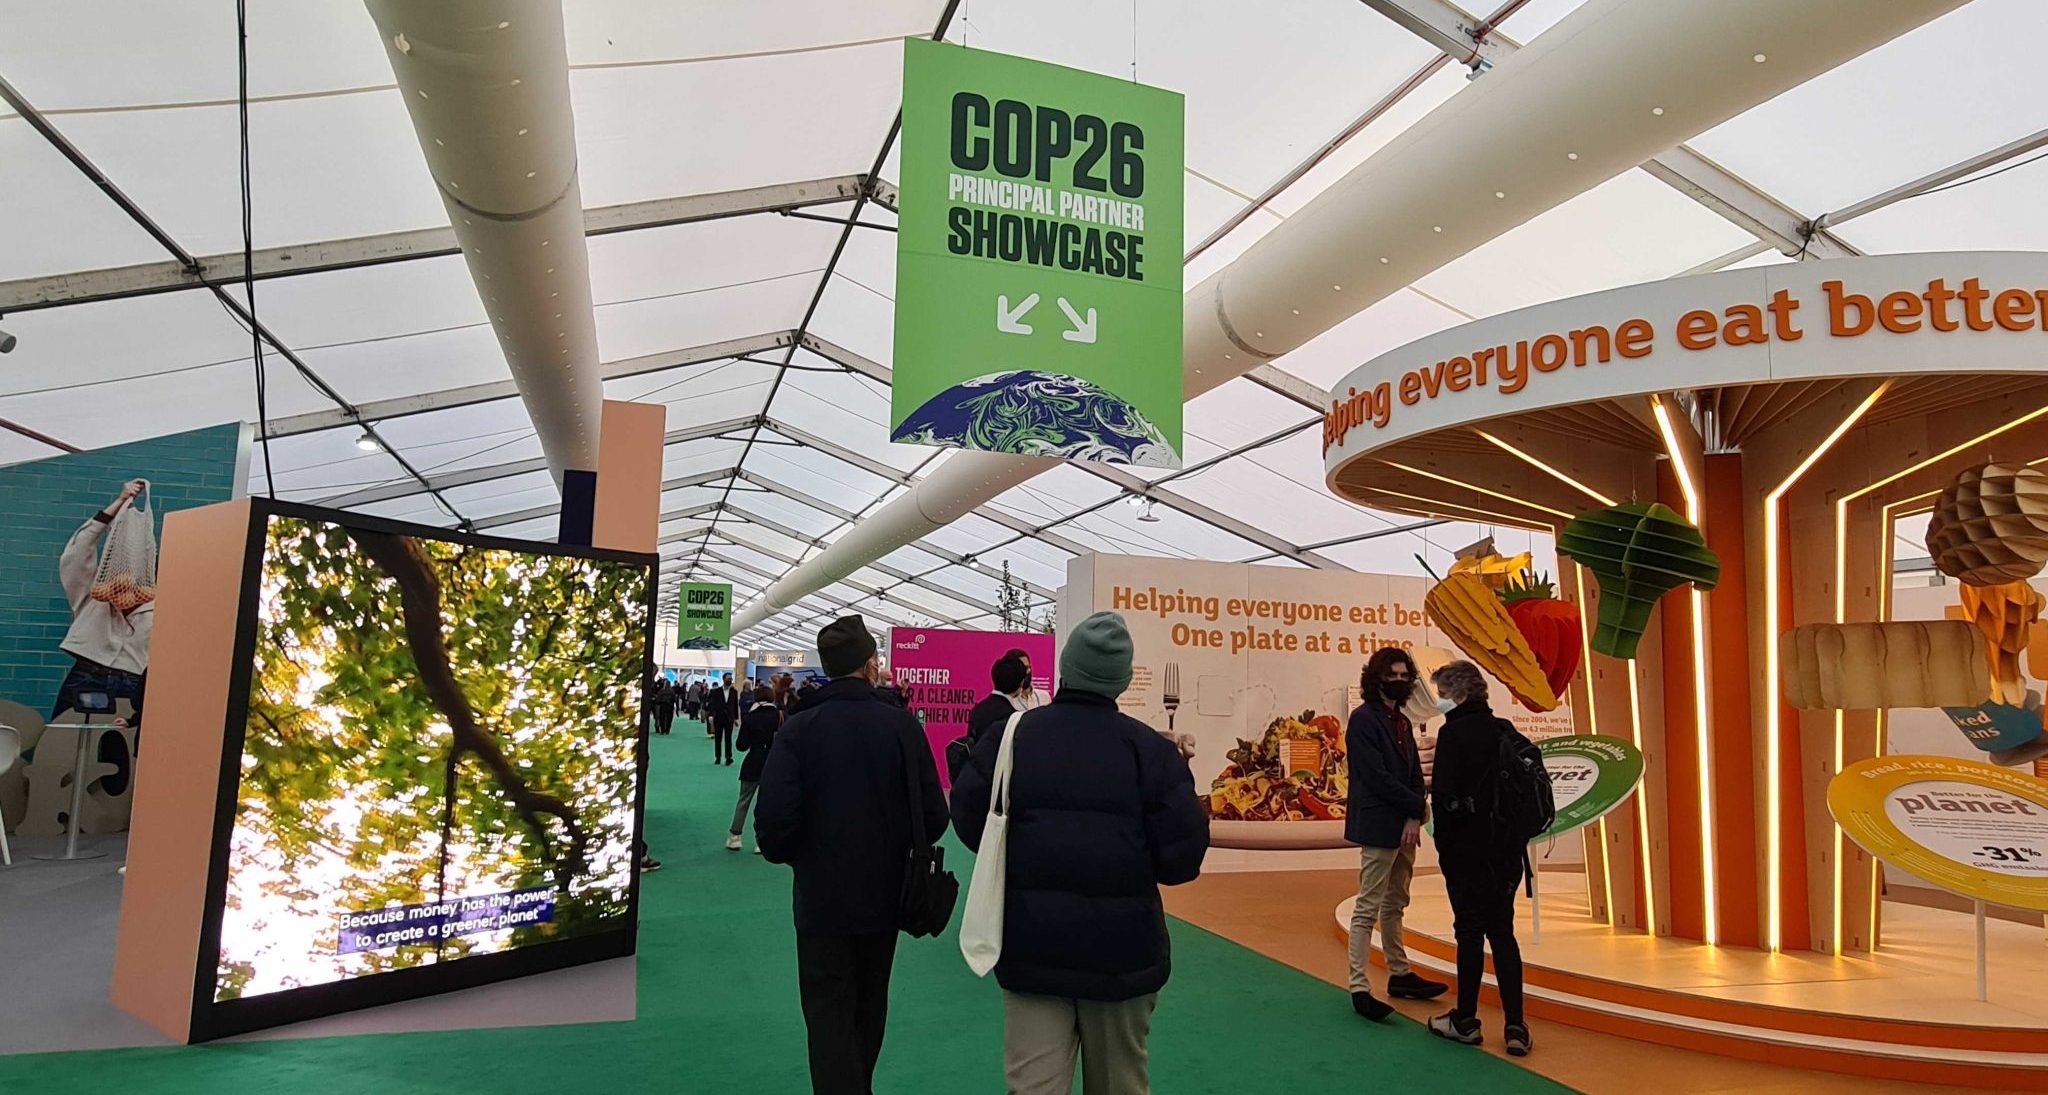 Partner pavilions in the Green Zone of Cop26